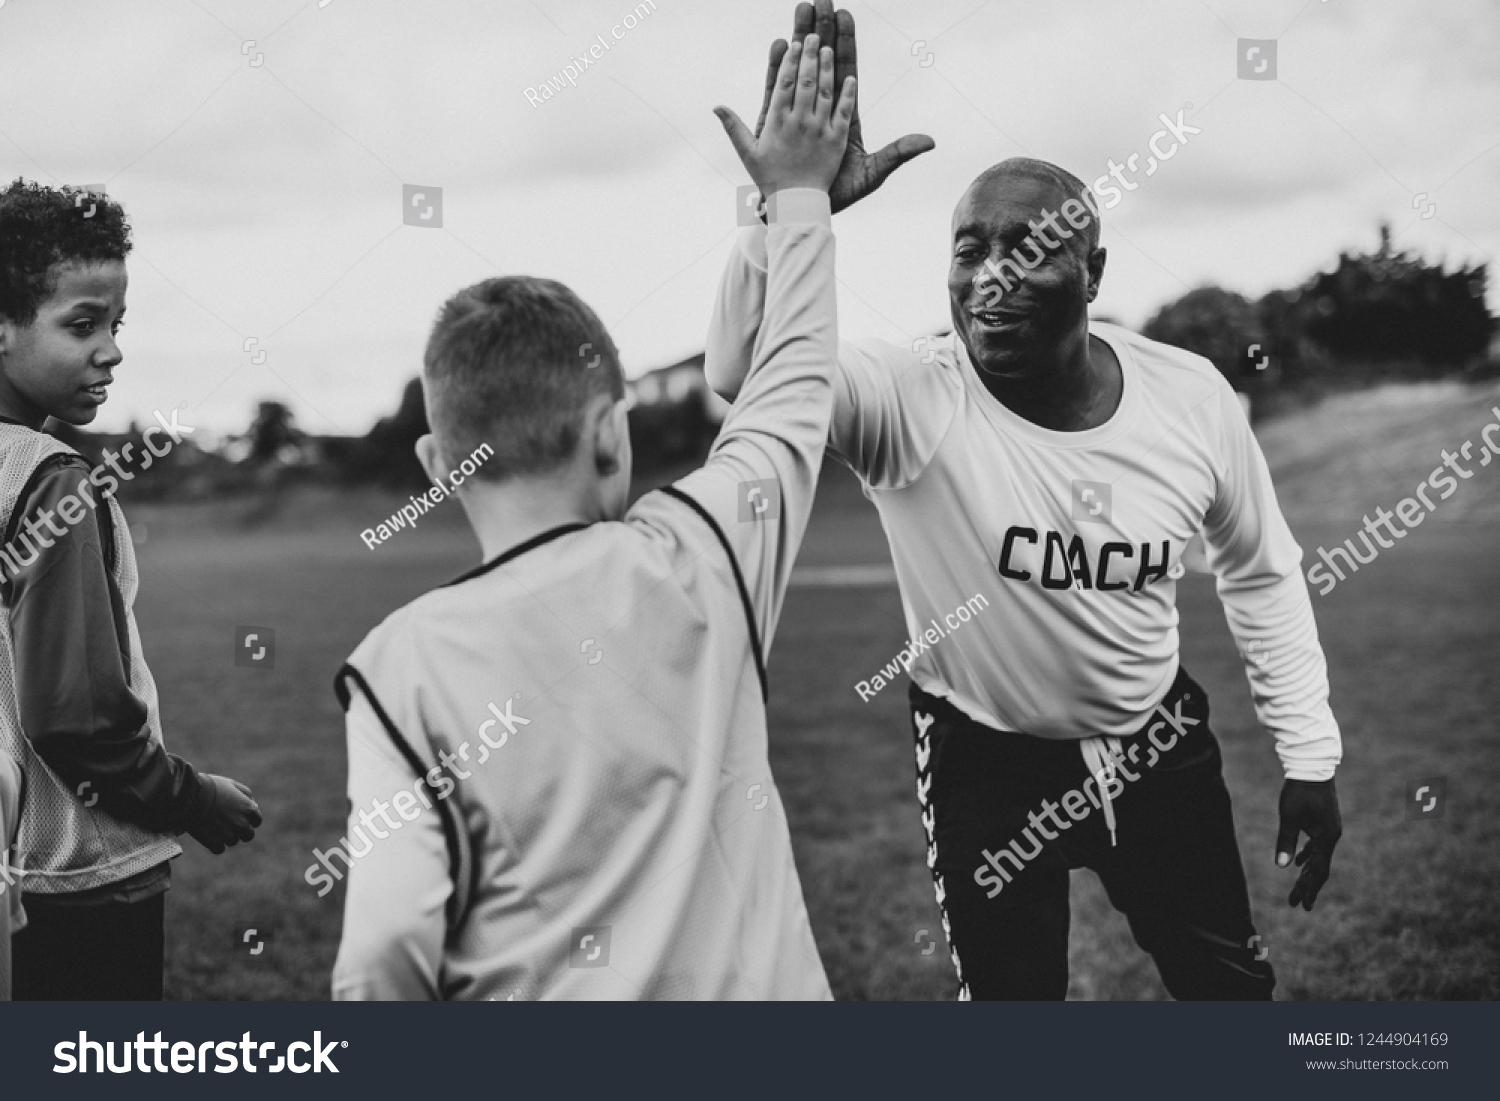 Football coach doing a high five with his student #1244904169